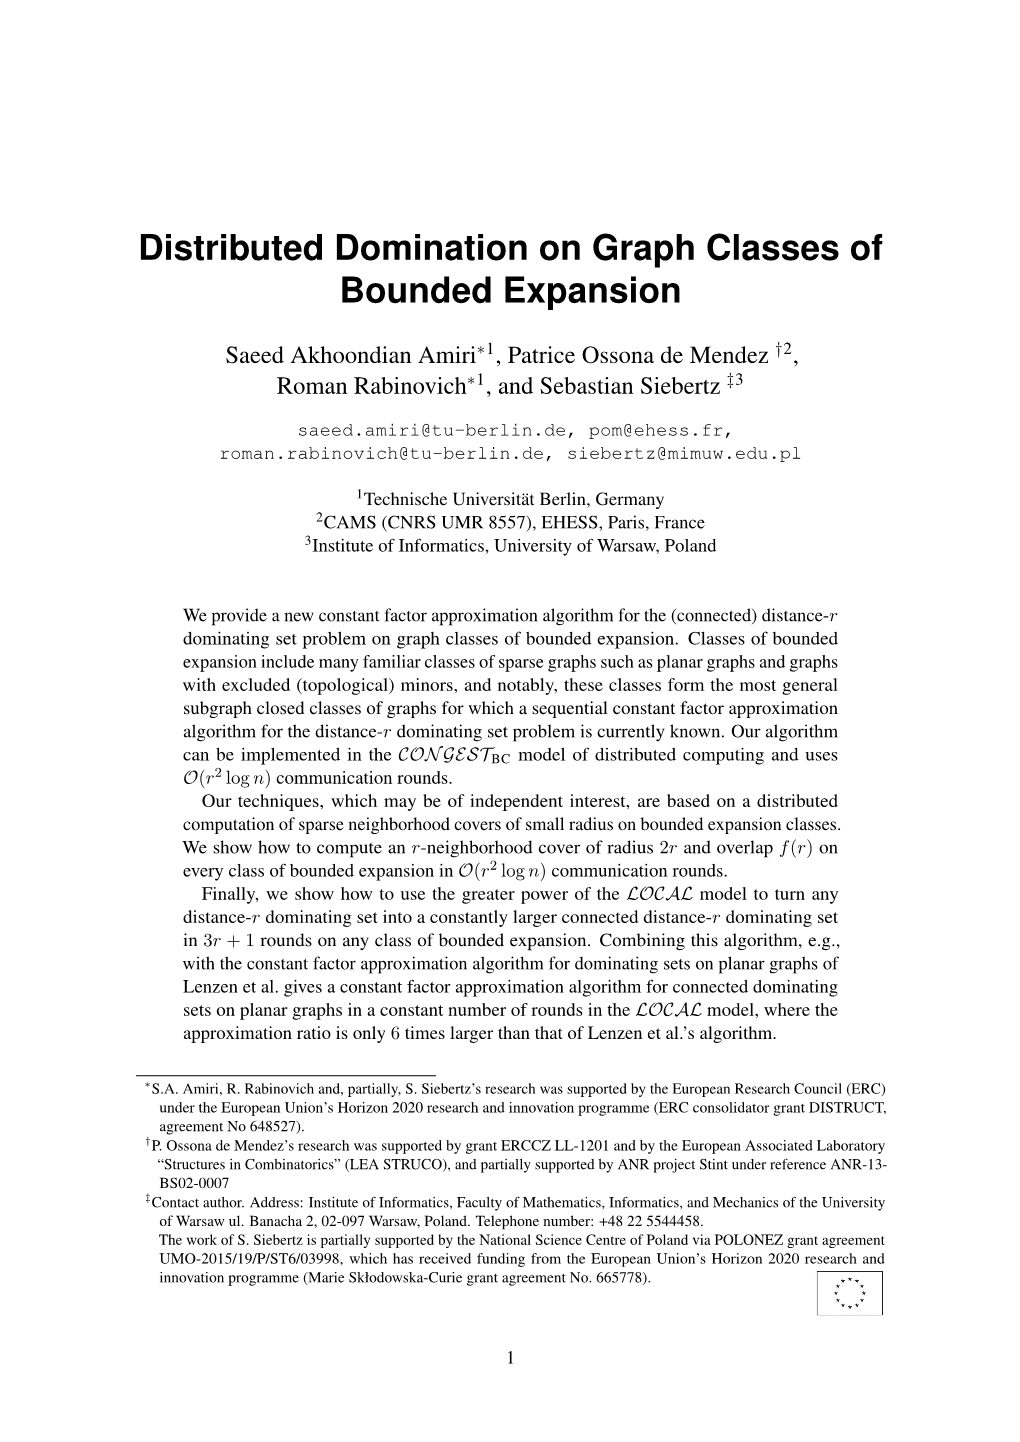 Distributed Domination on Graph Classes of Bounded Expansion